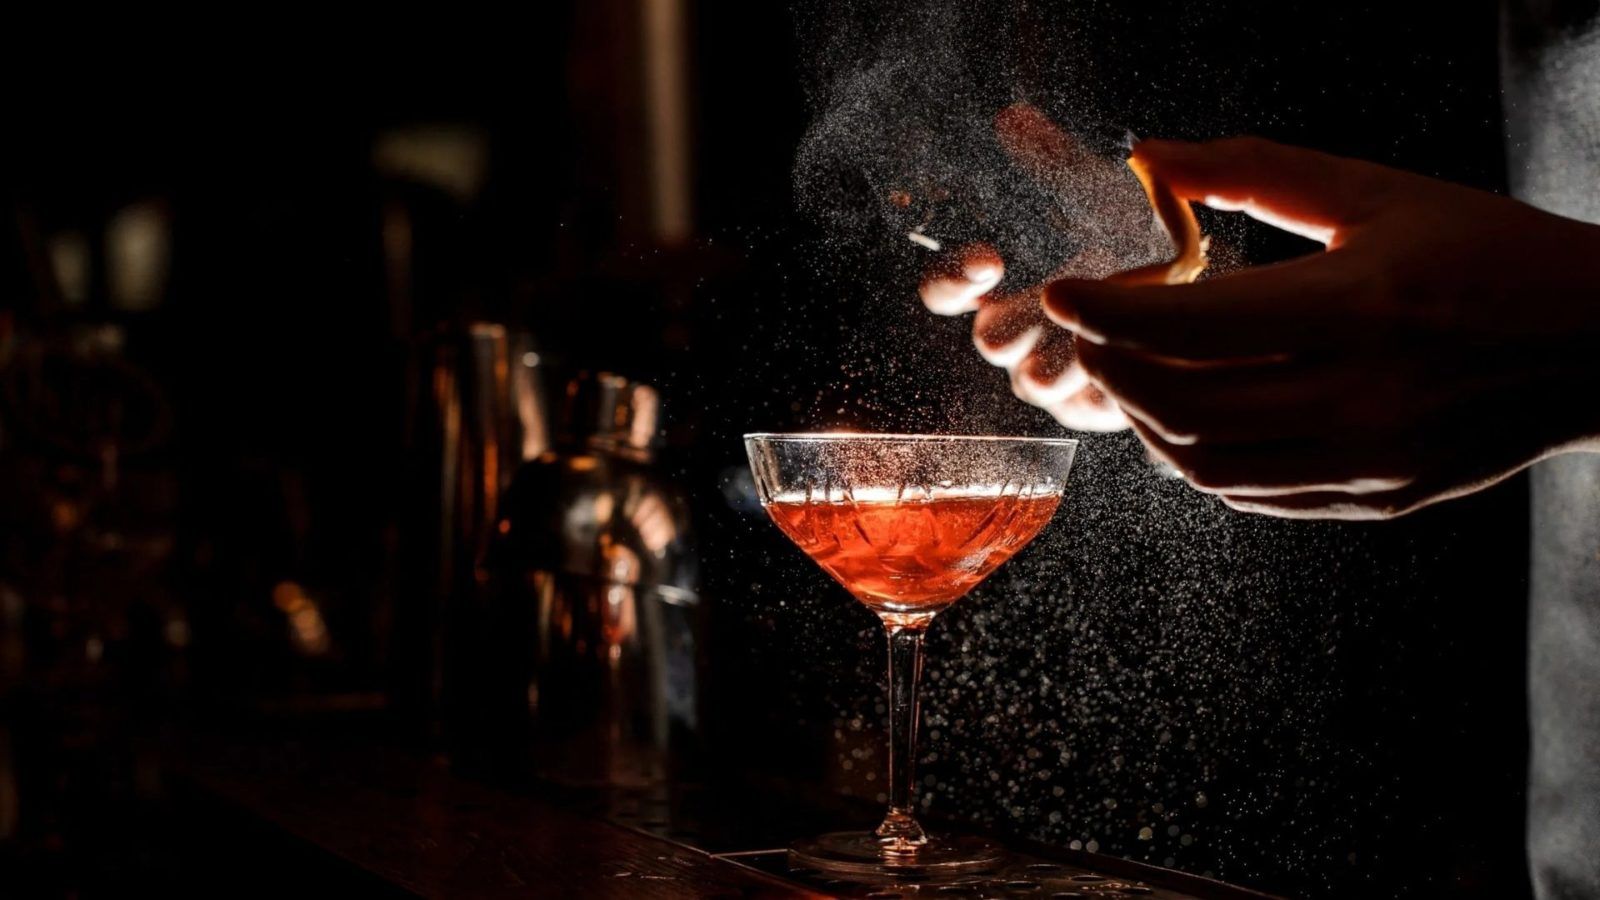 10 classic whiskey cocktail recipes to add an old-fashioned charm to your bar repertoire